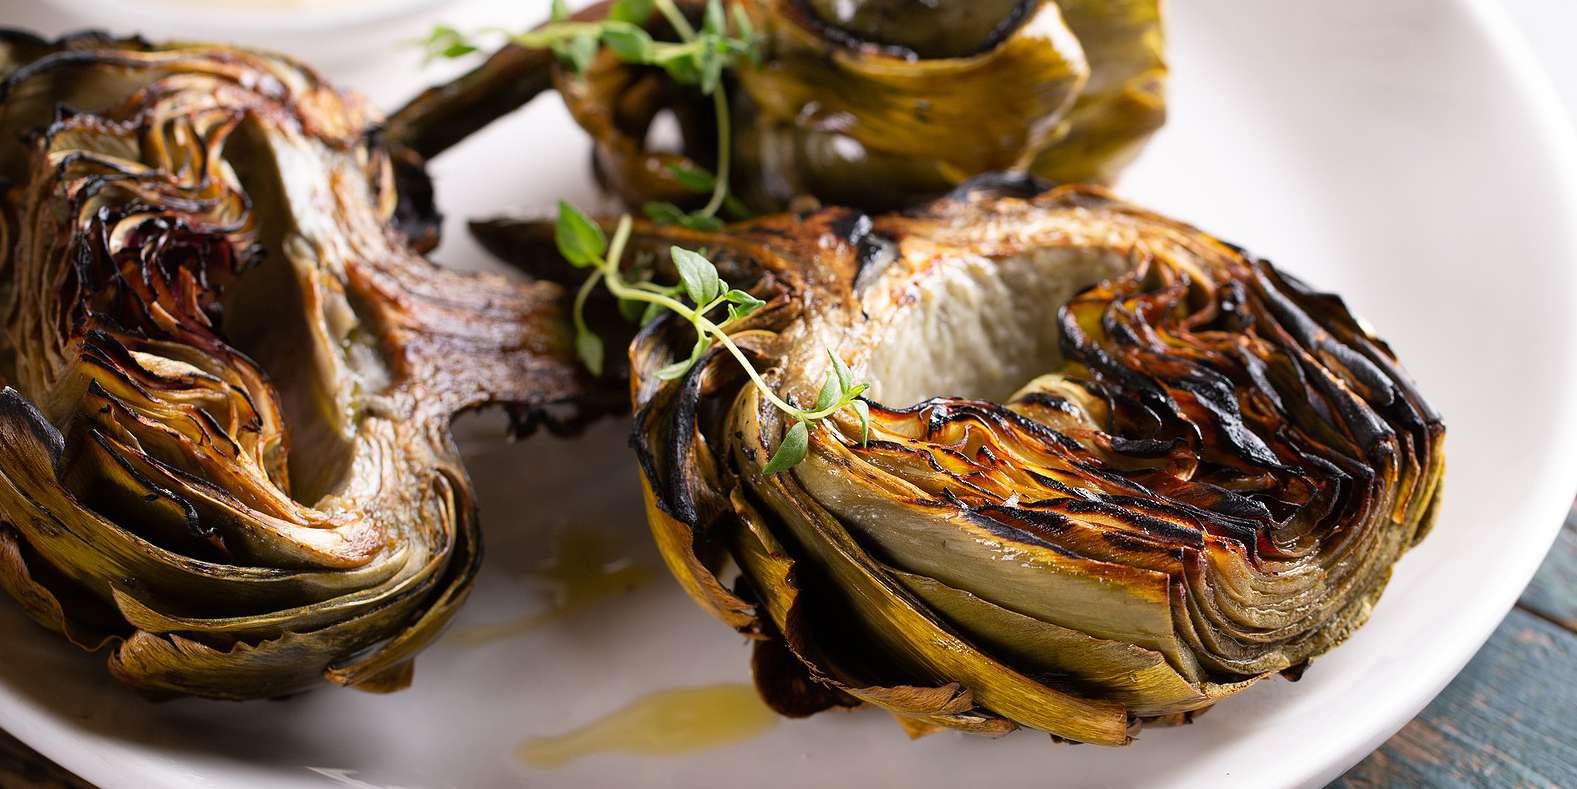 Artichokes with Lemon & Olive Oil Dipping Sauce